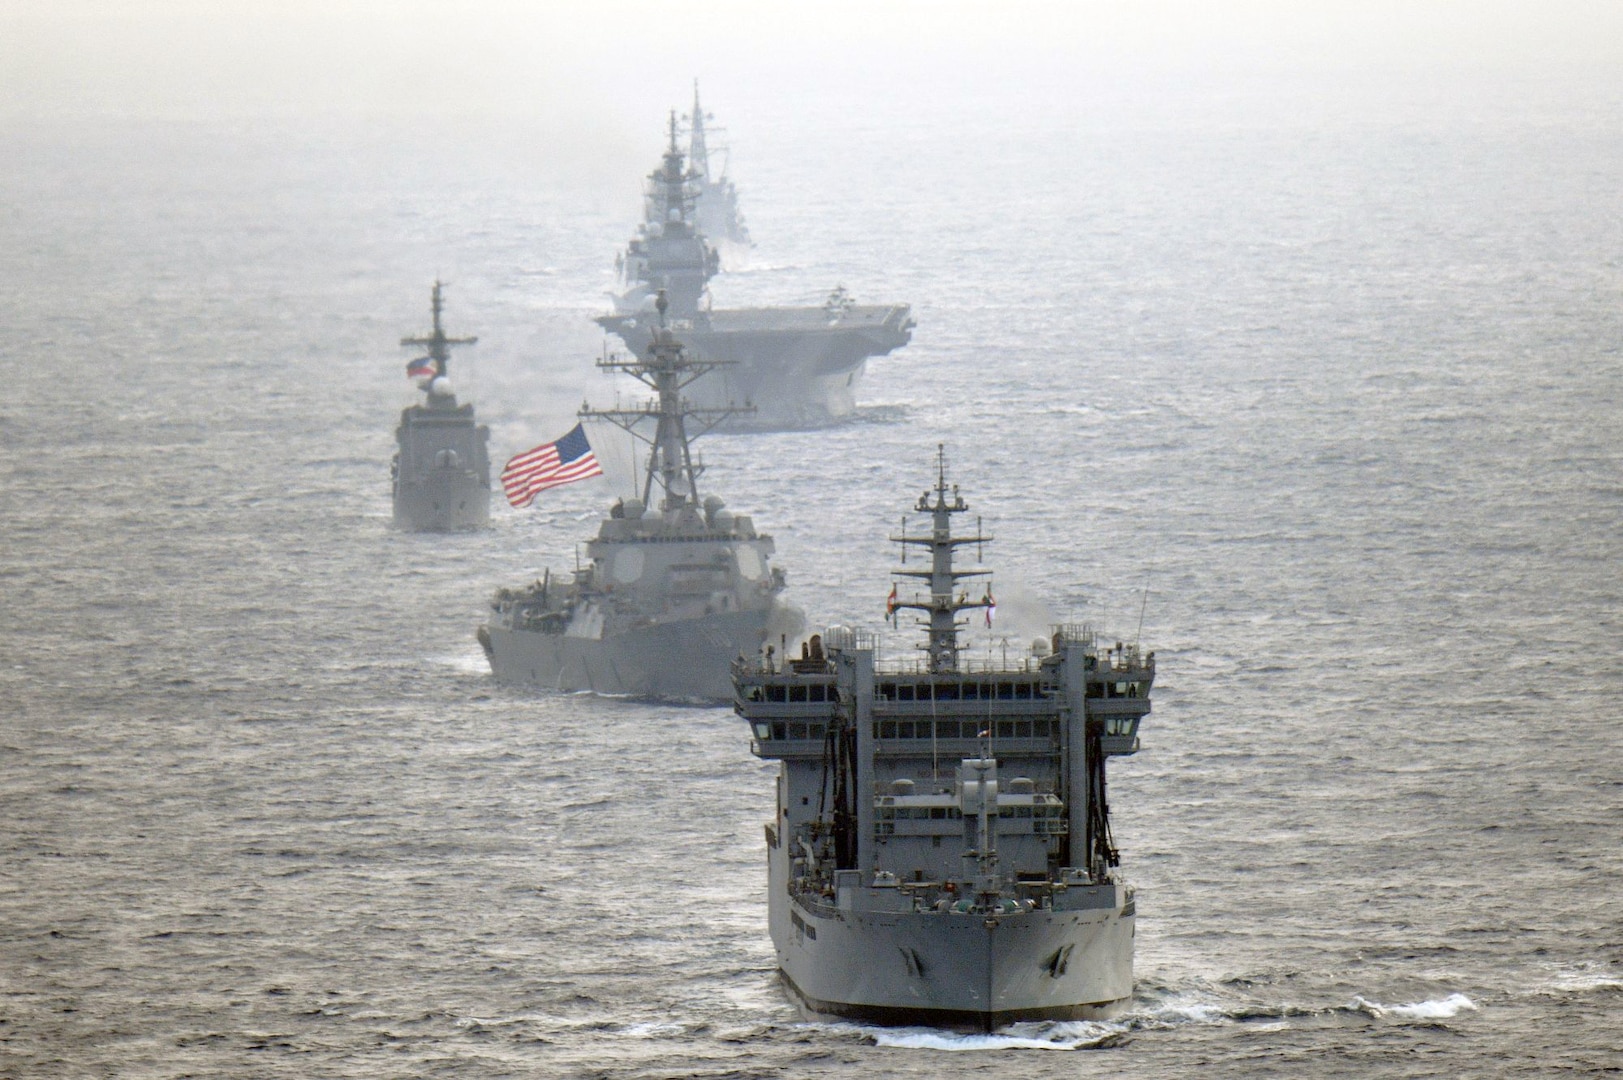 U.S., Partner Navies Sail Together in South China Sea